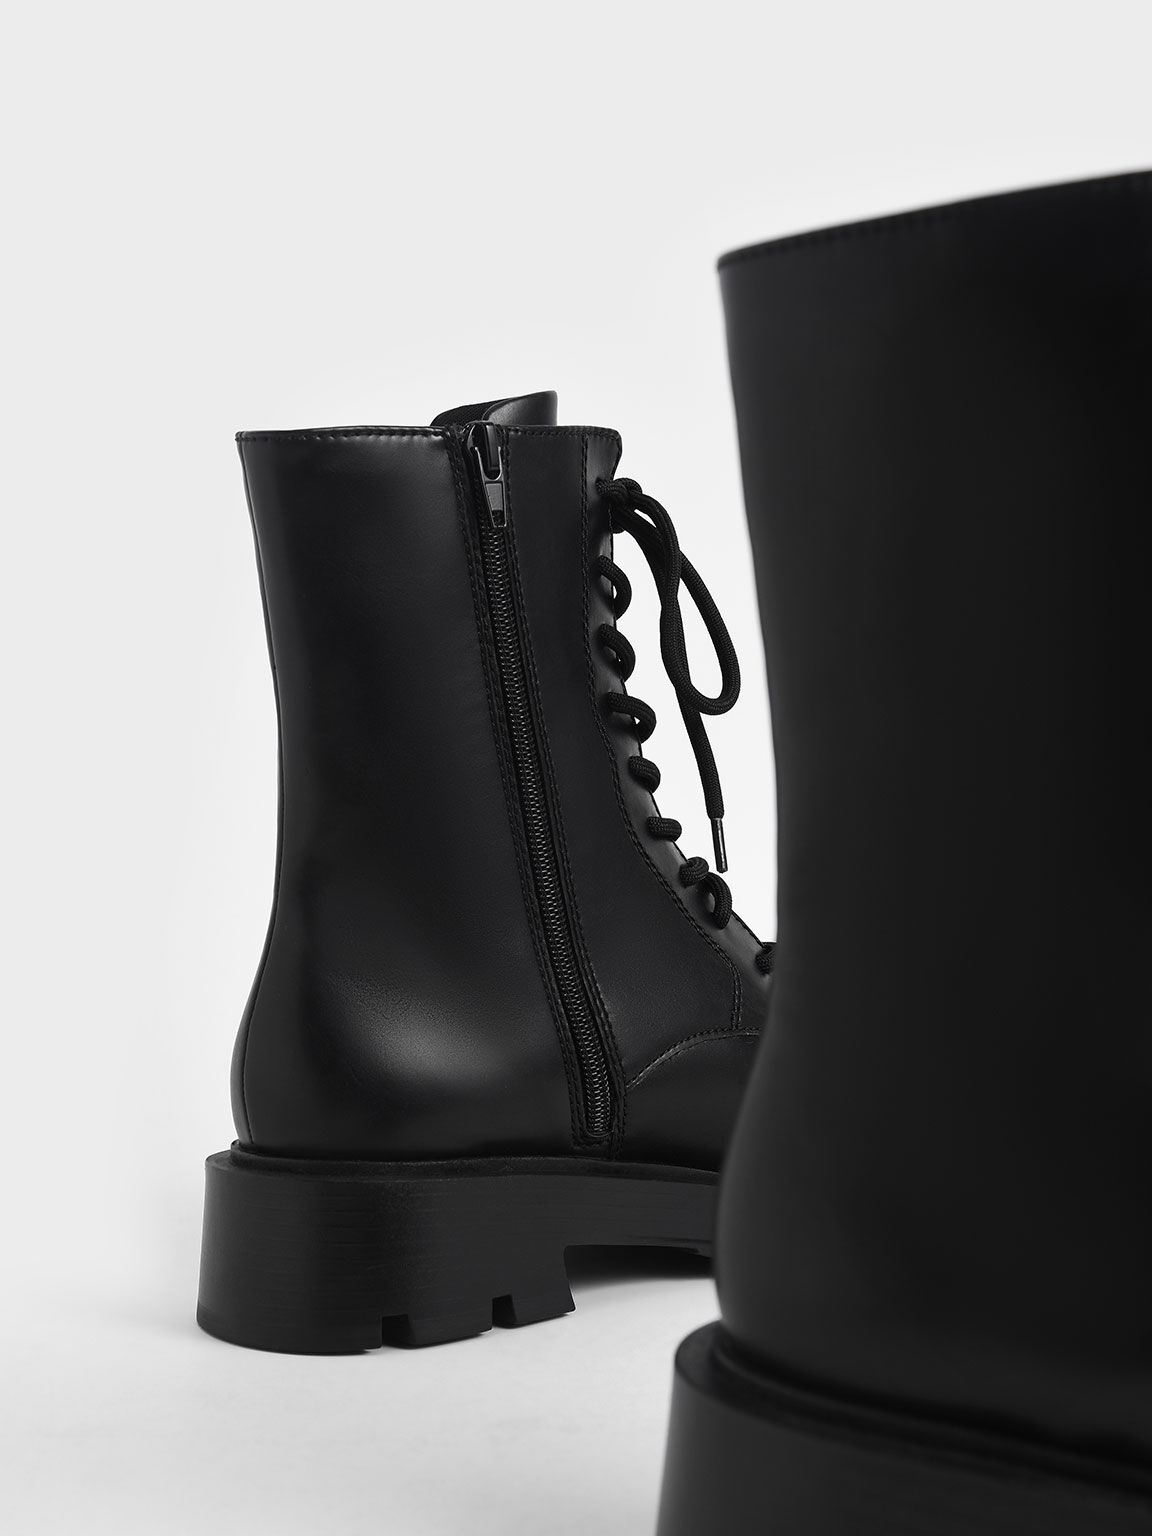 Beaded Lace-Up Ankle Boots, Black, hi-res